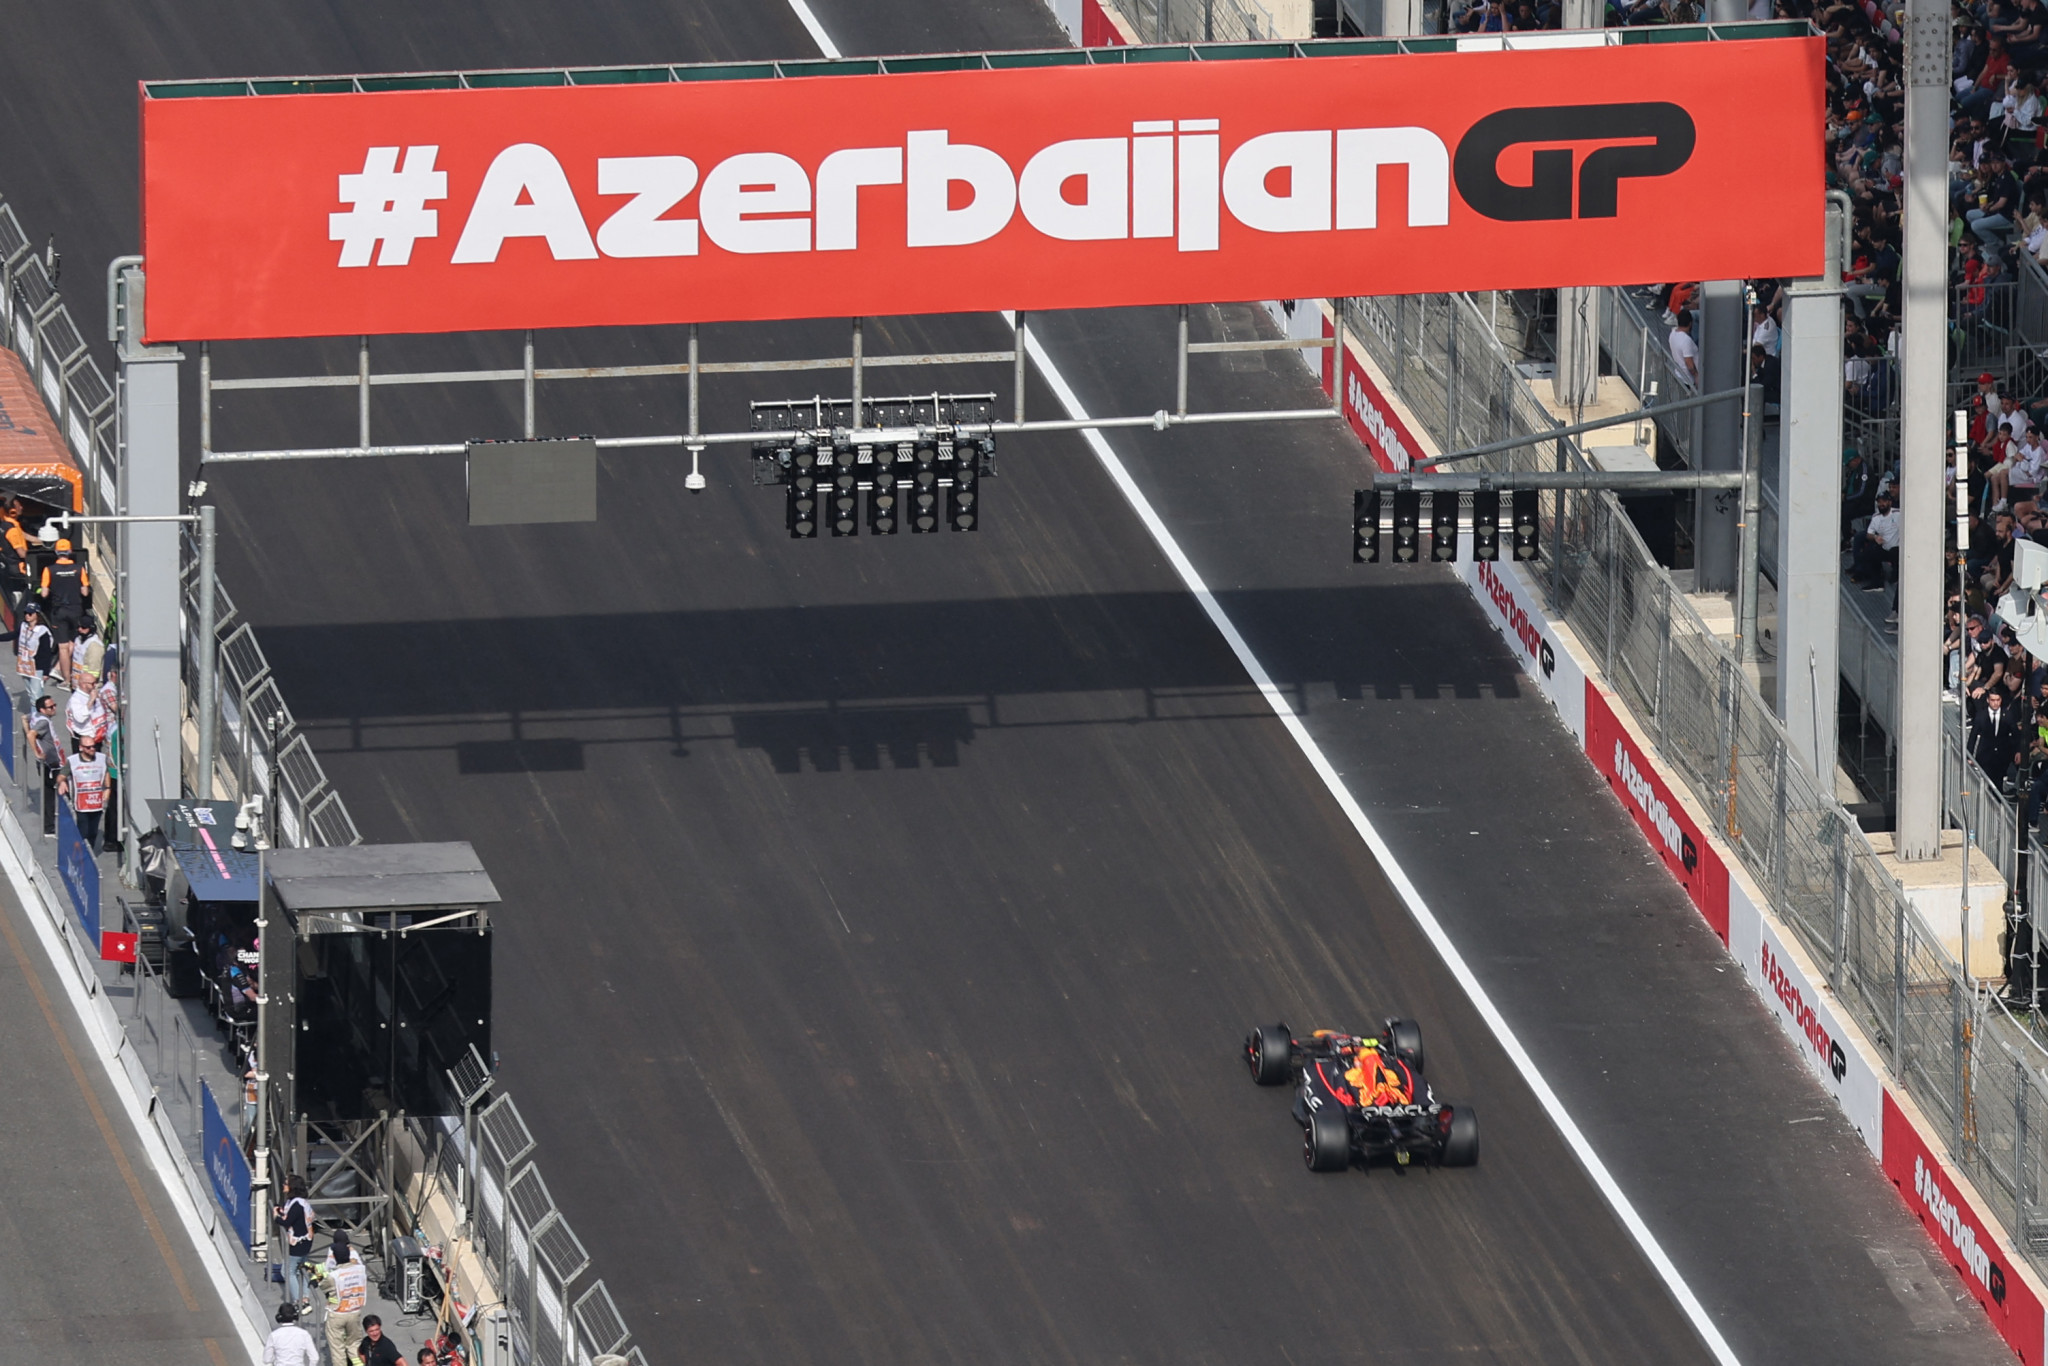 Organisers delighted with Azerbaijan Grand Prix following latest F1 showing